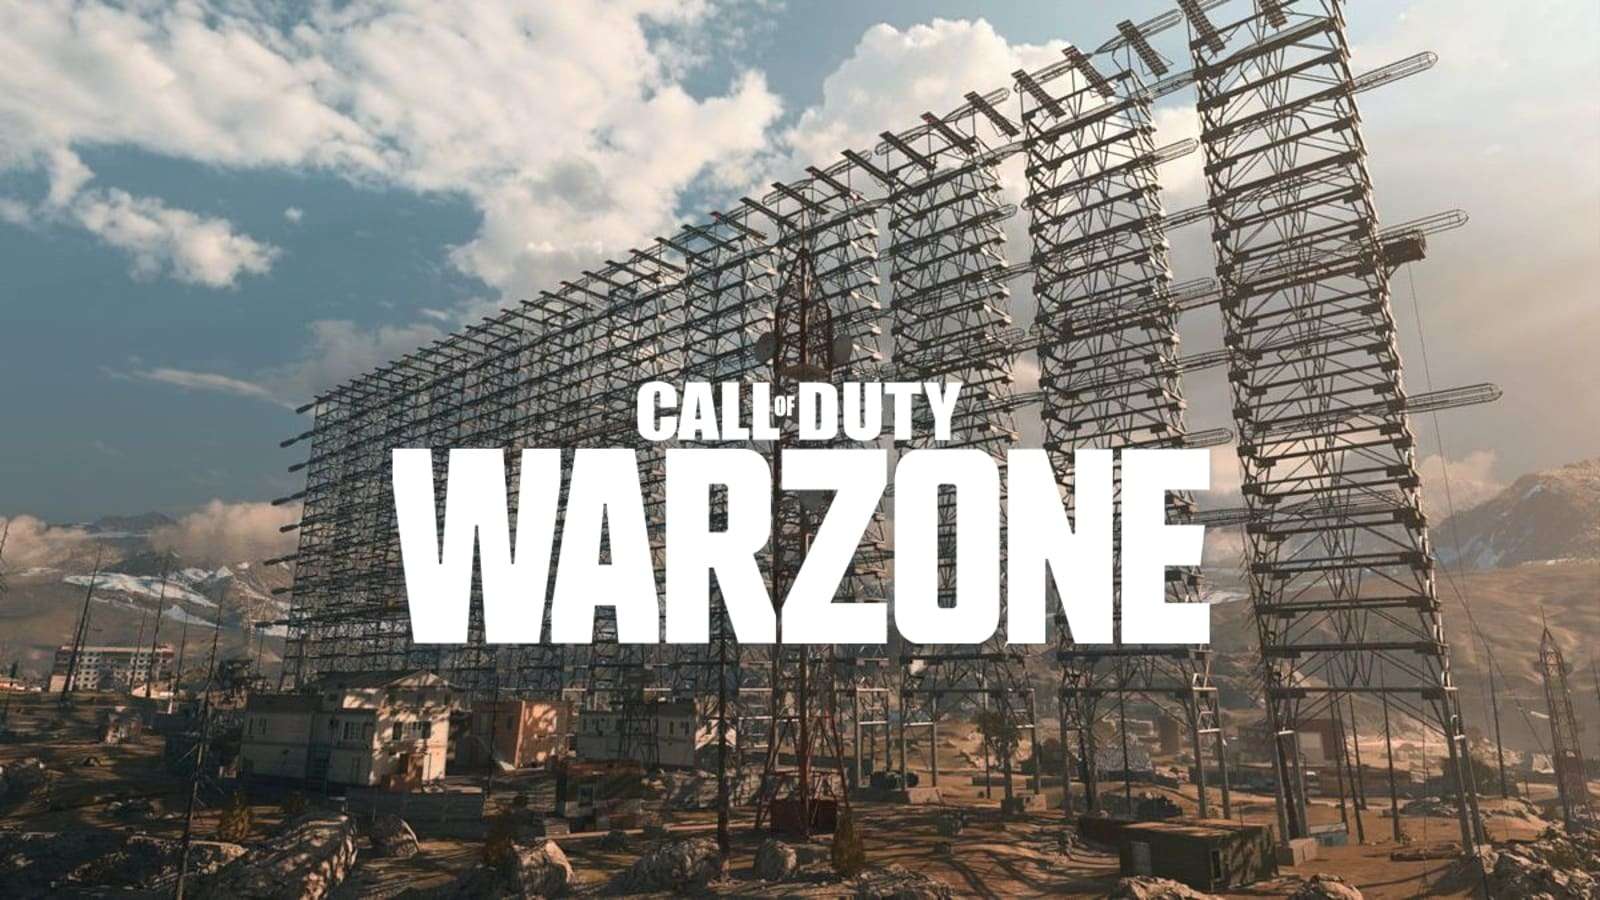 Climb to top of array tower in Warzone